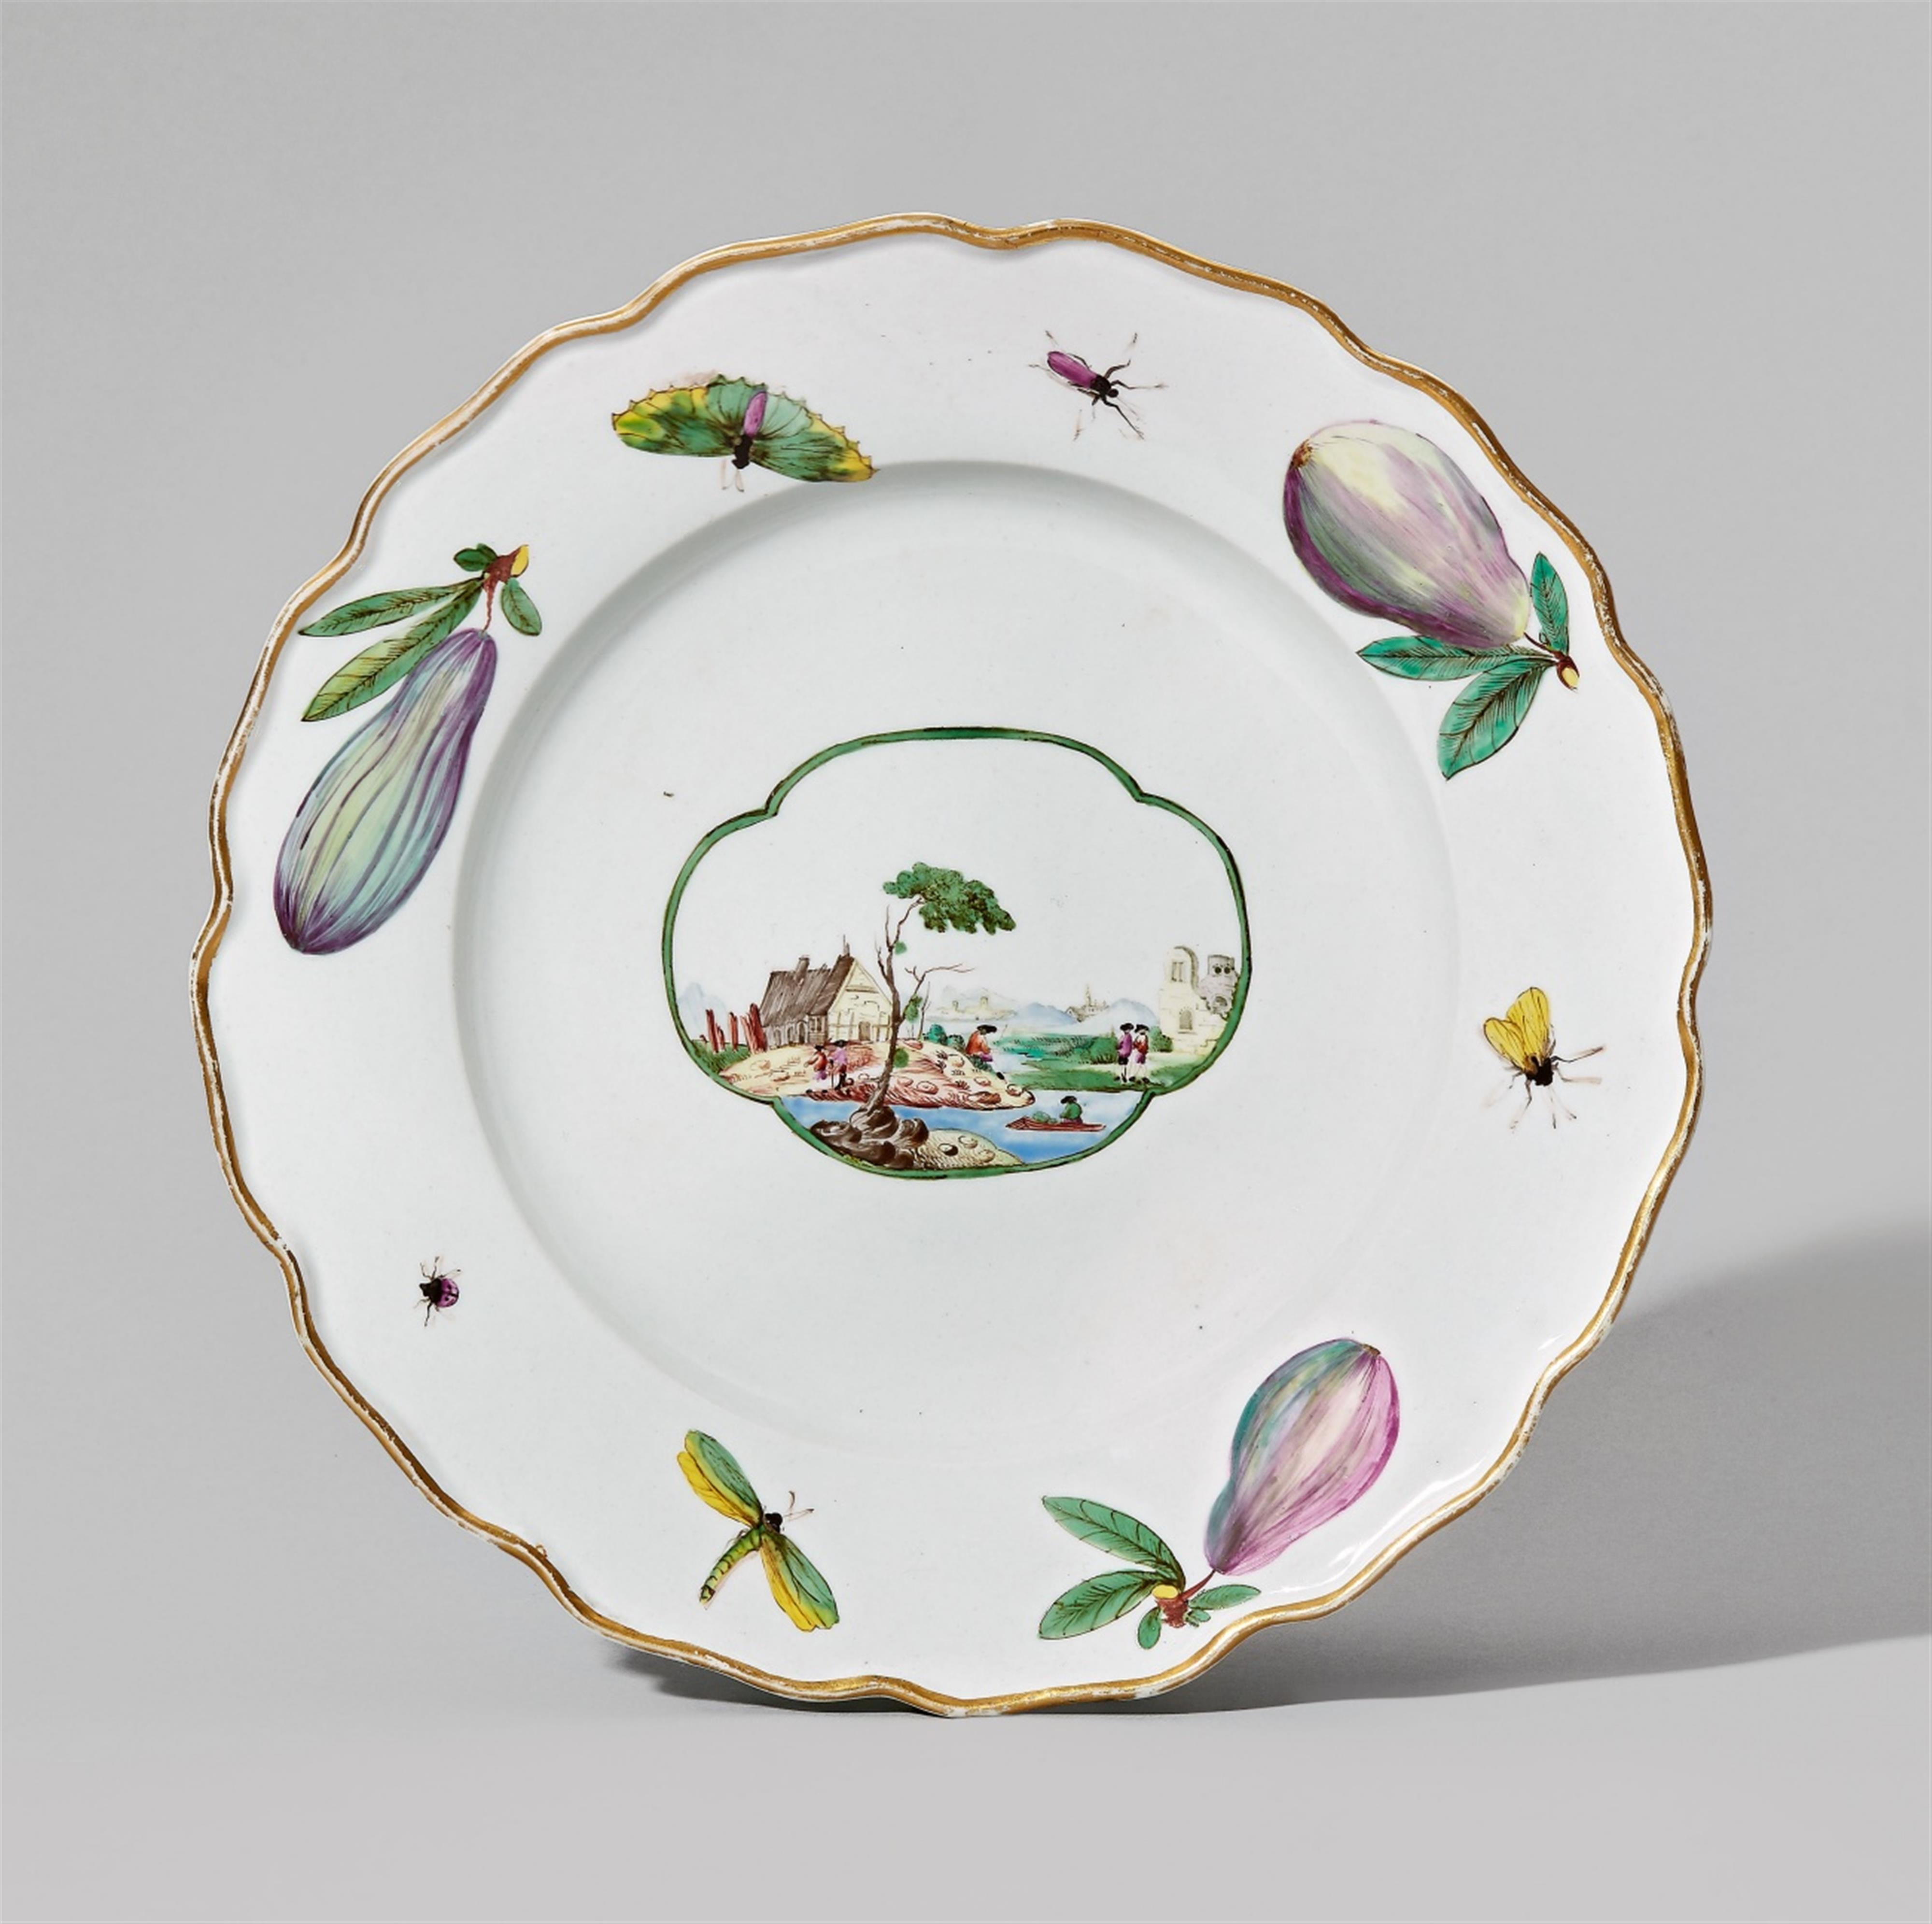 A Nymphenburg porcelain plate with a landscape and figs - image-1